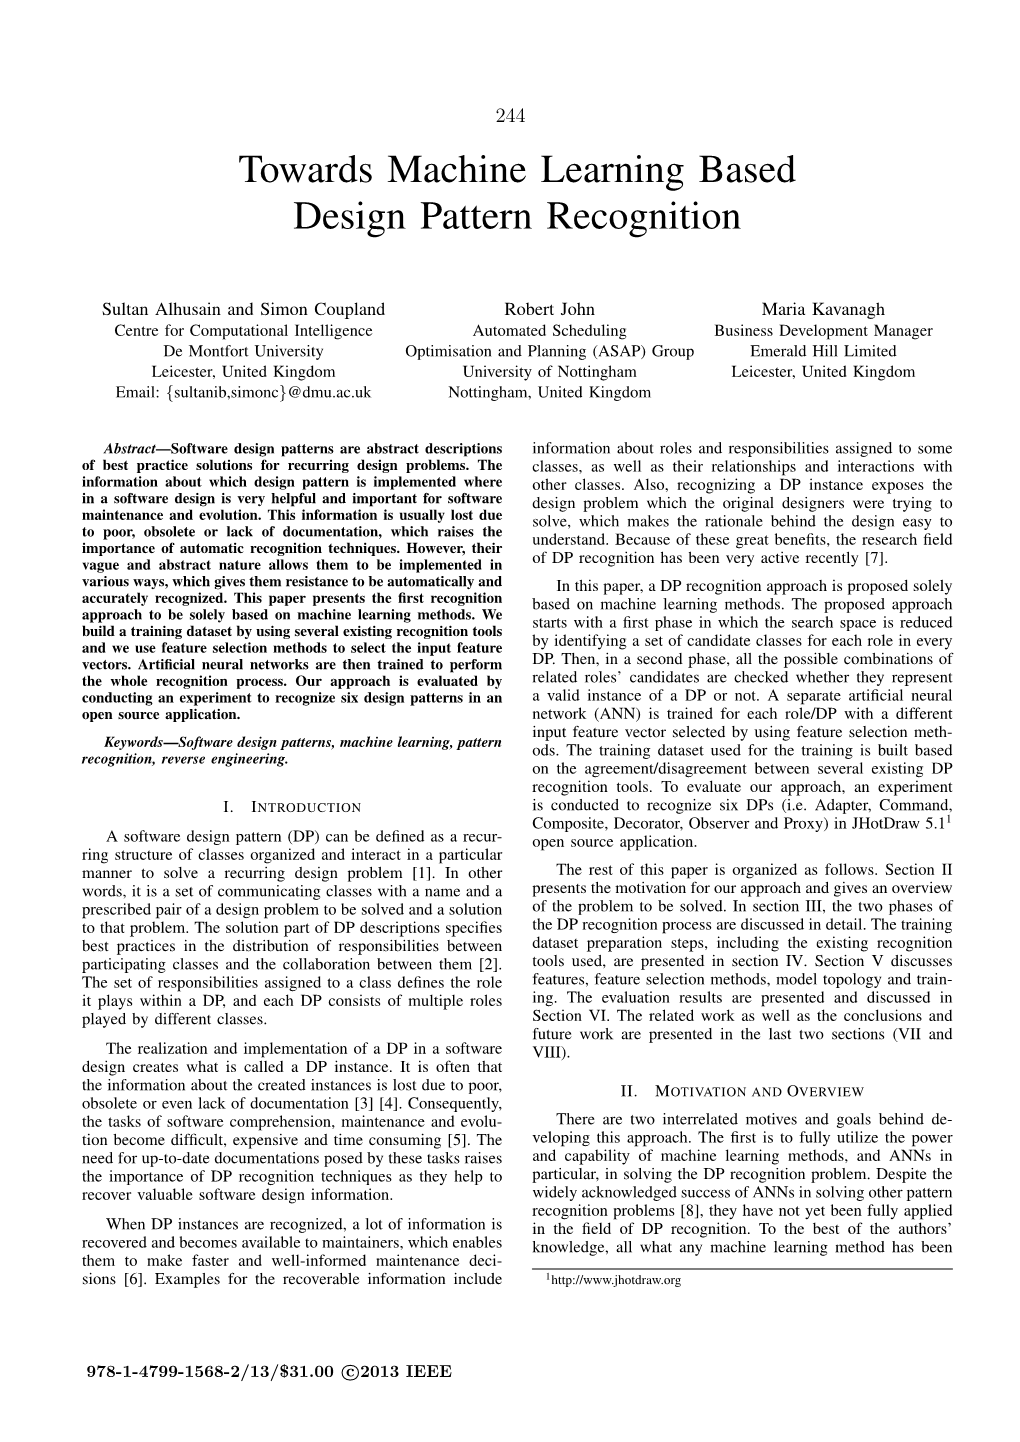 Towards Machine Learning Based Design Pattern Recognition